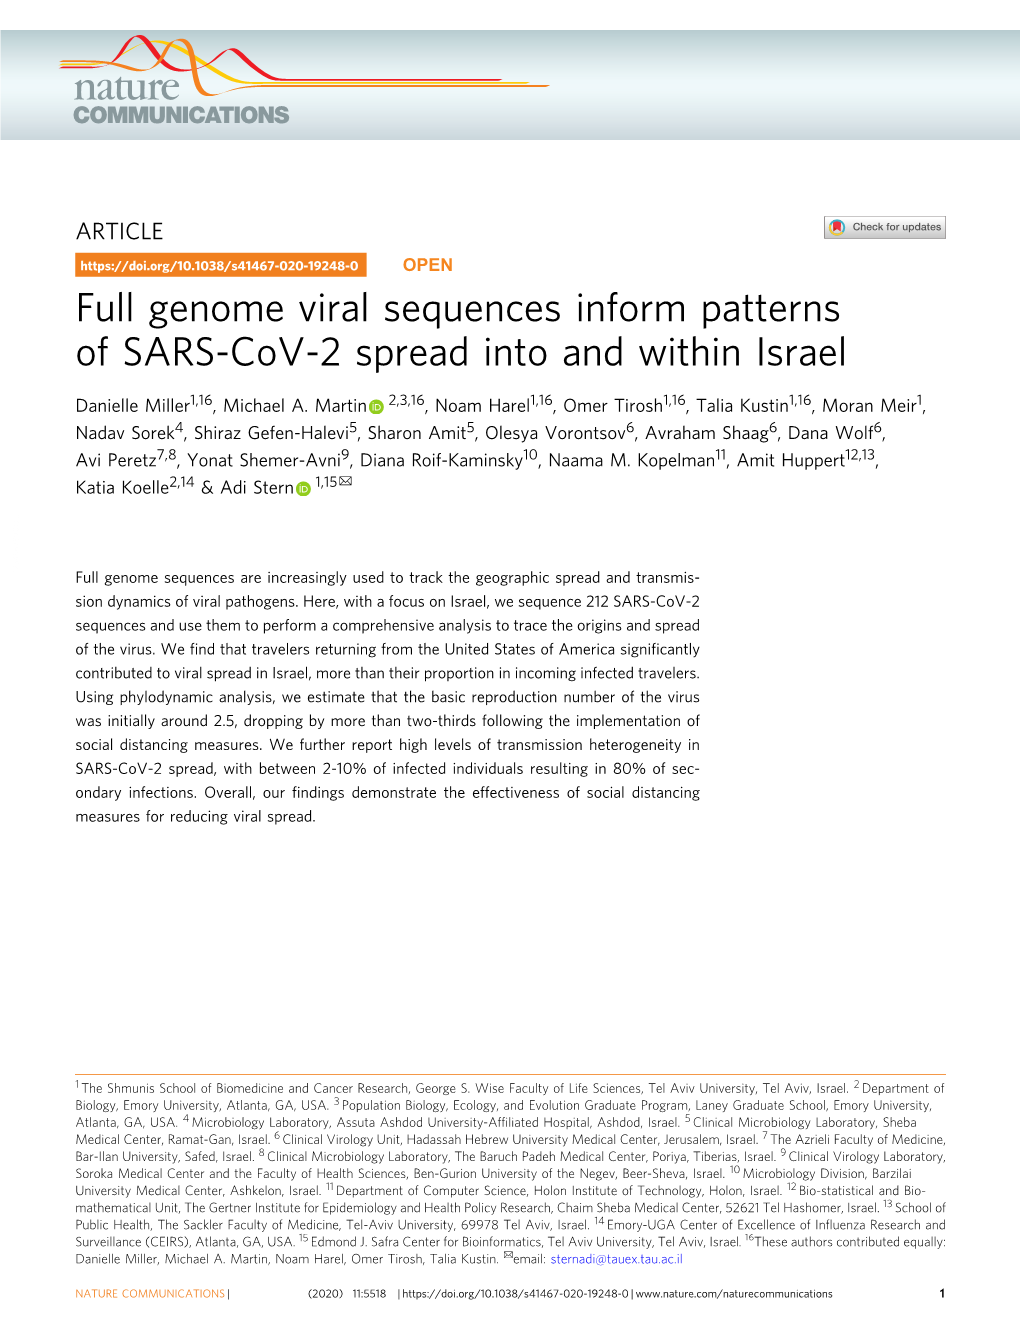 Full Genome Viral Sequences Inform Patterns of SARS-Cov-2 Spread Into and Within Israel